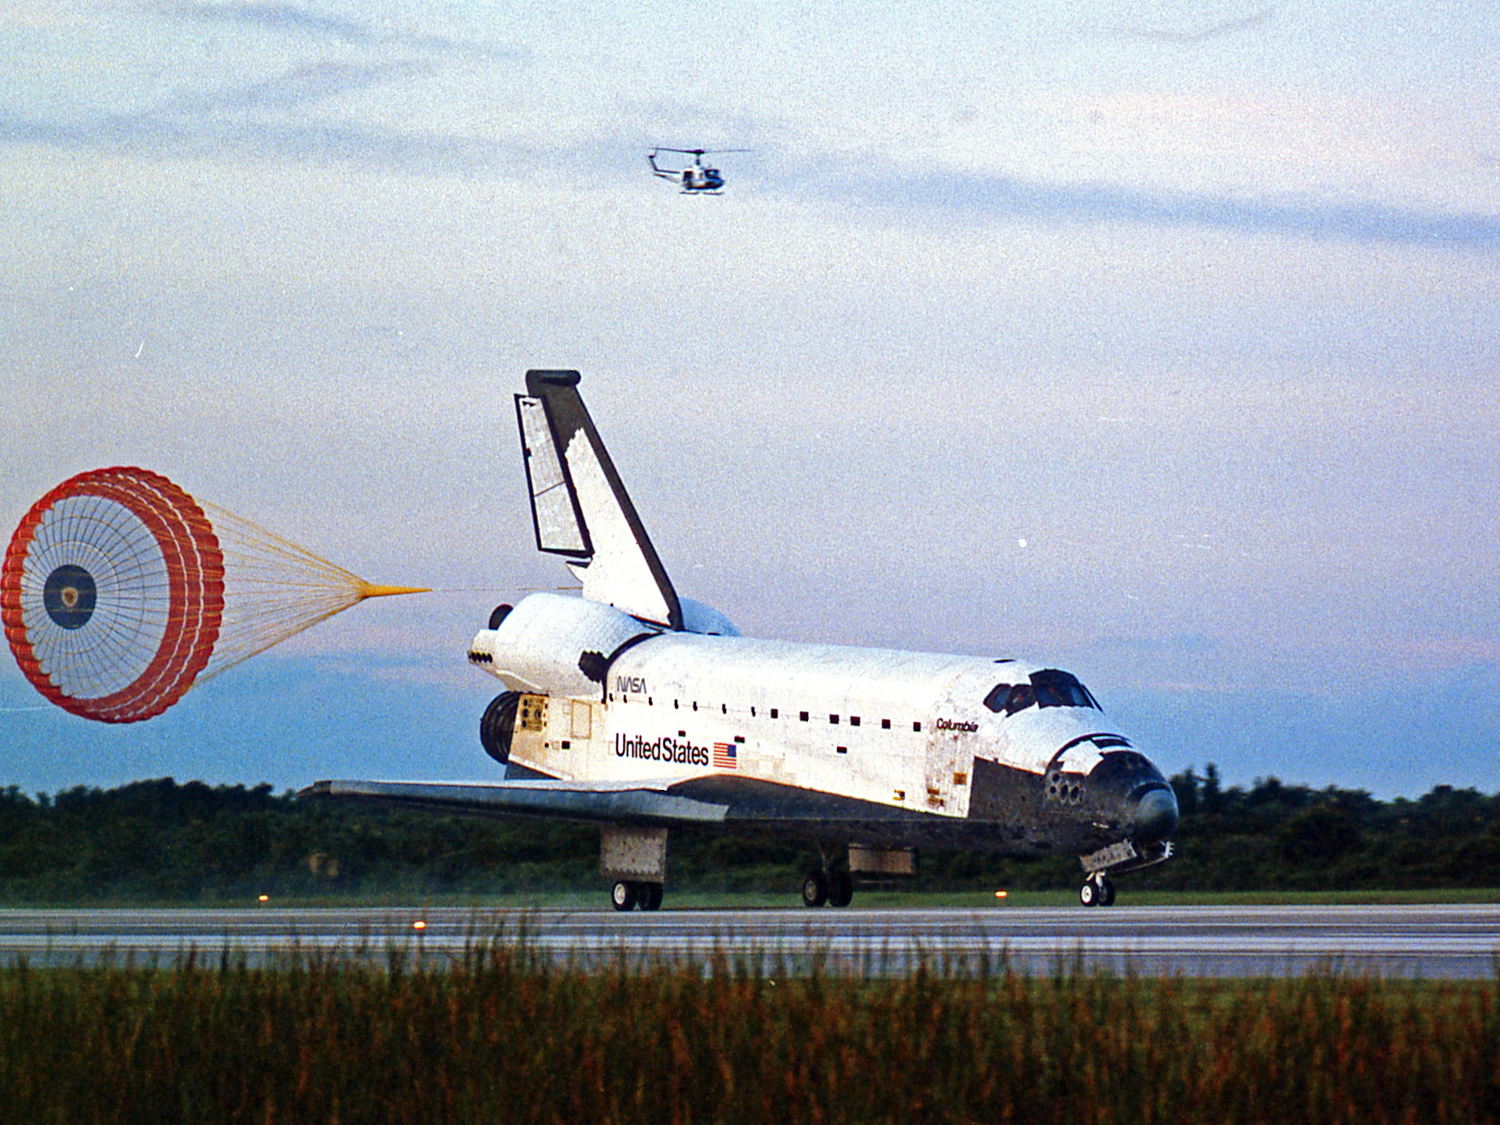  Landing of Columbia at KSC on July 23, 1994. 